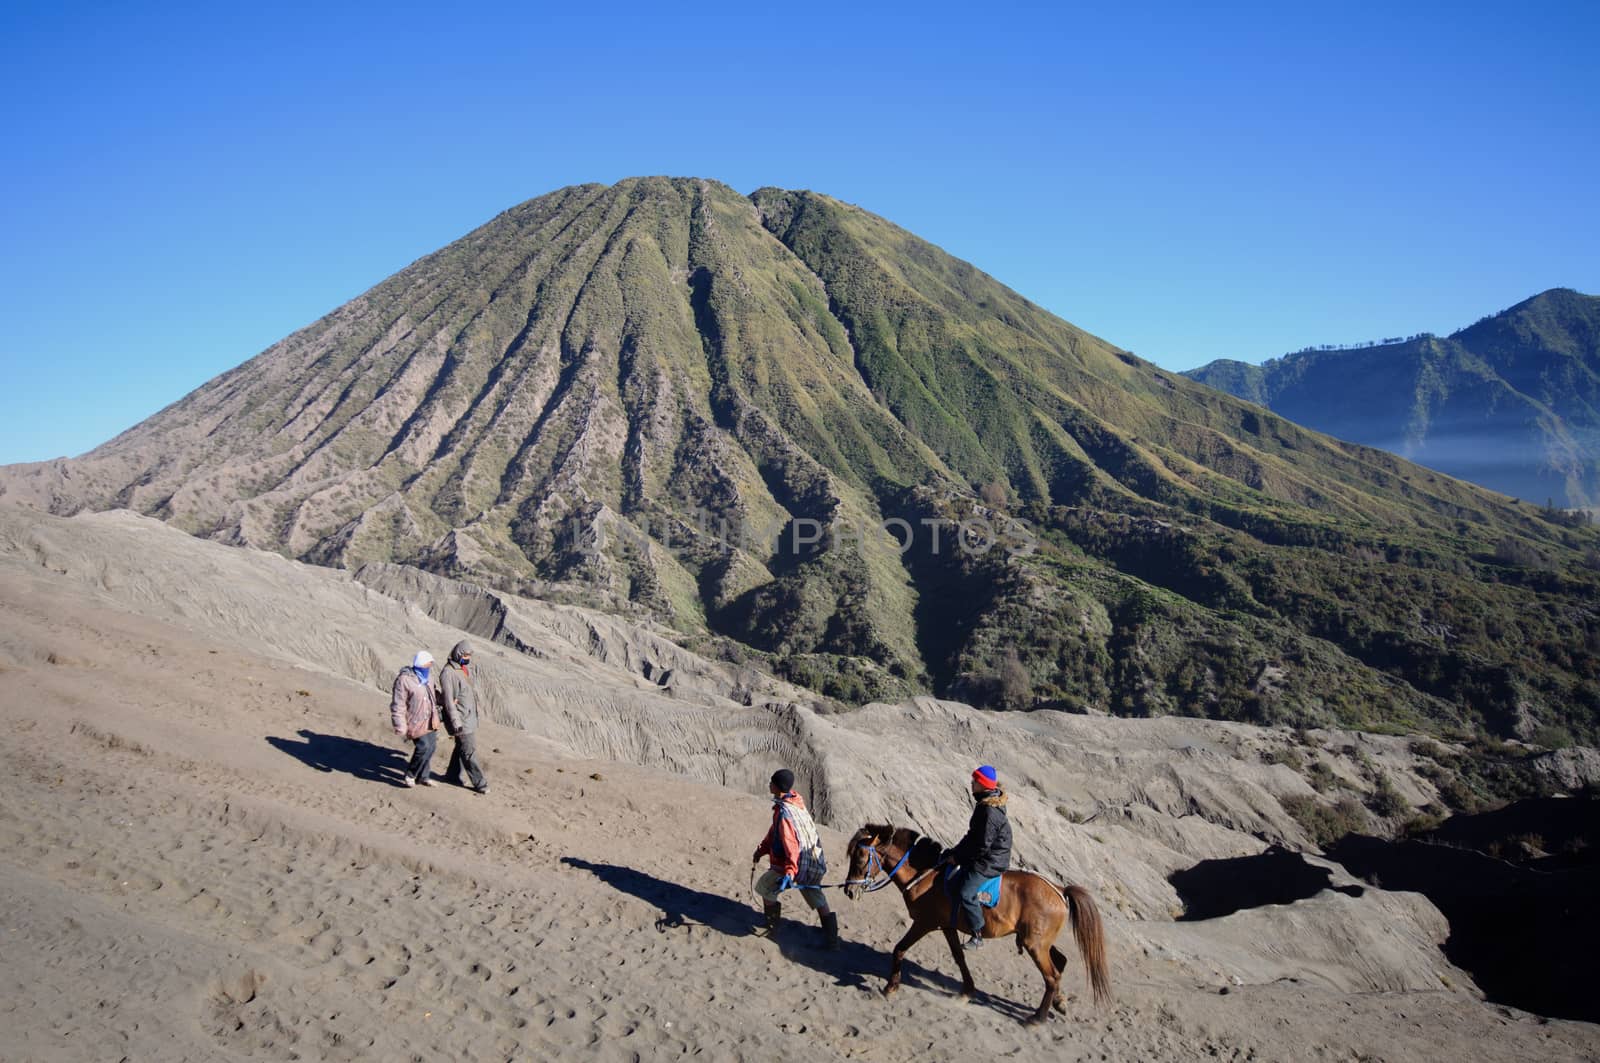 MOUNT BROMO, JAVA INDONESIA - JUNE 28, 2014: Undefined model posing on a horse under the Bromo massif. by johnnychaos